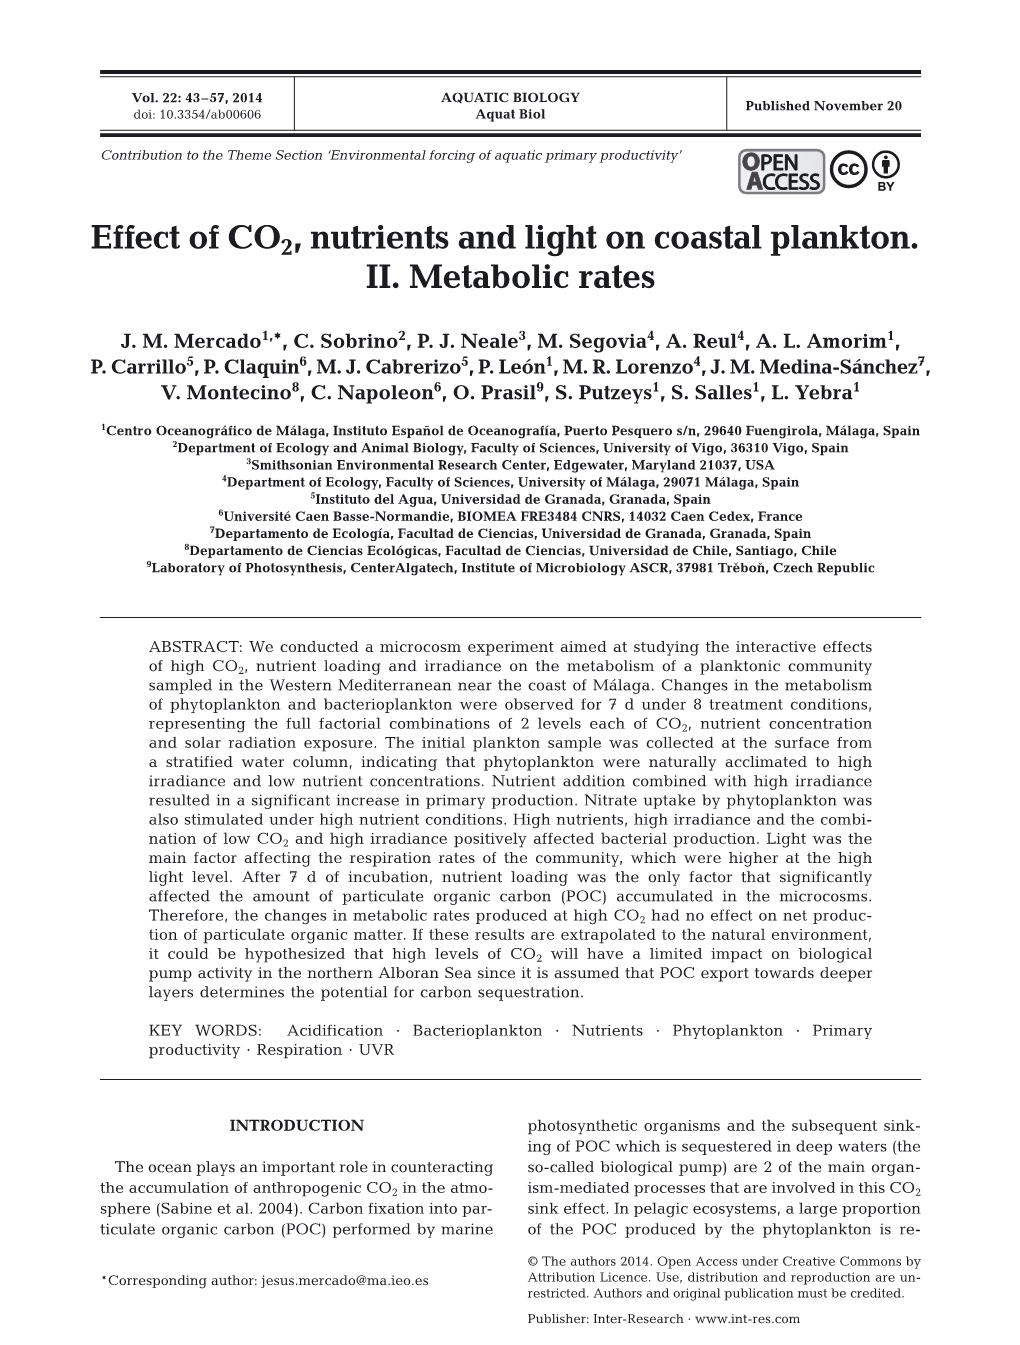 Effect of CO2, Nutrients and Light on Coastal Plankton. II. Metabolic Rates